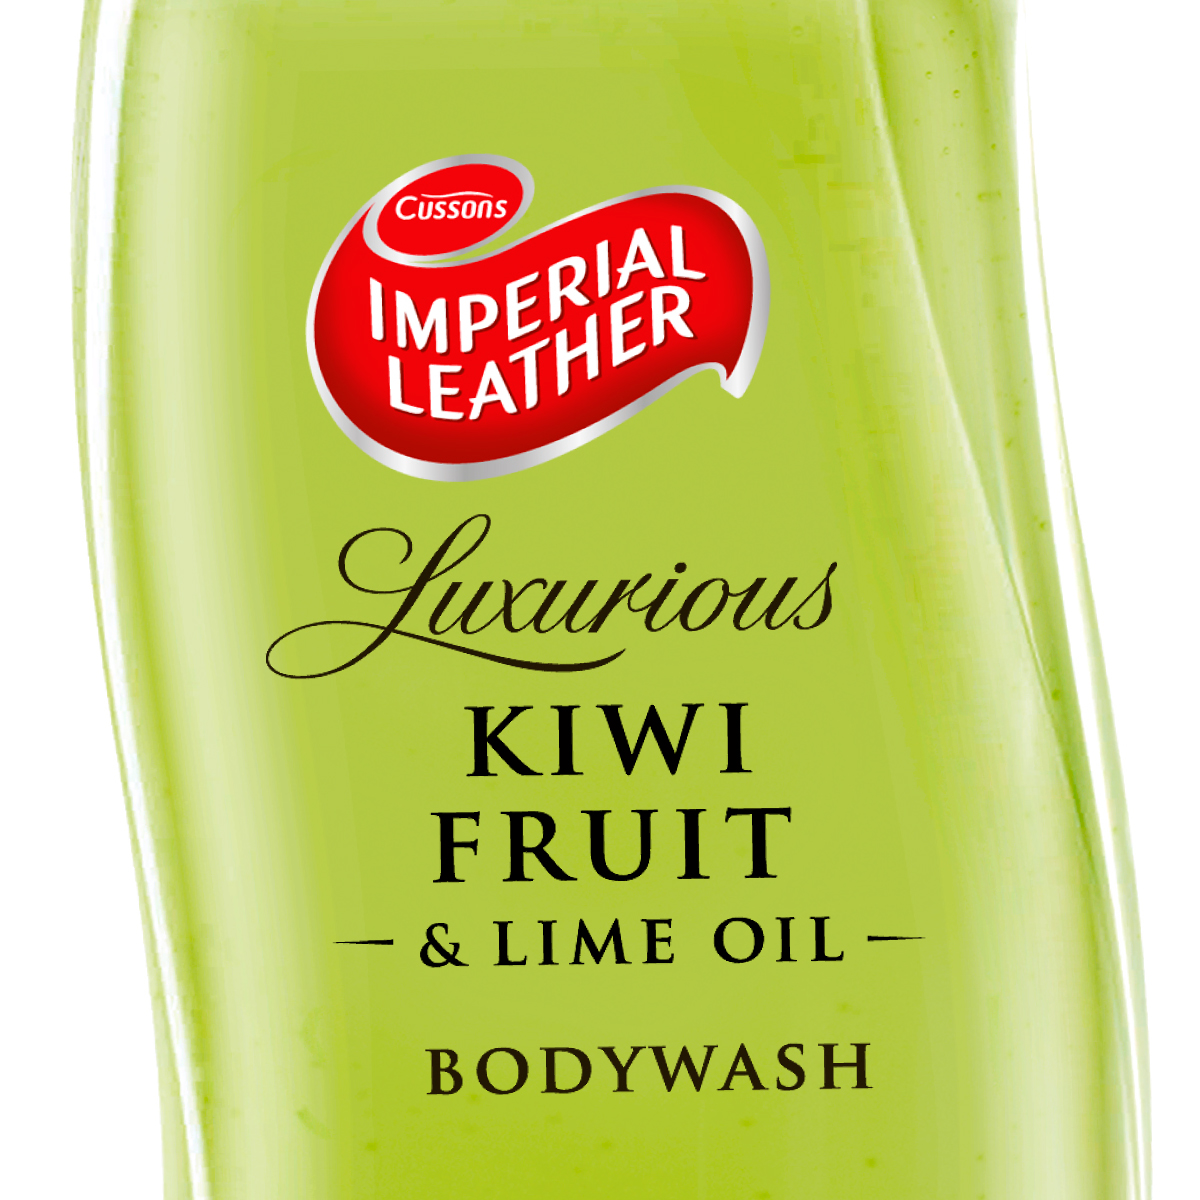 PZ Cussons Imperial Leather Bodywash Packaging Design